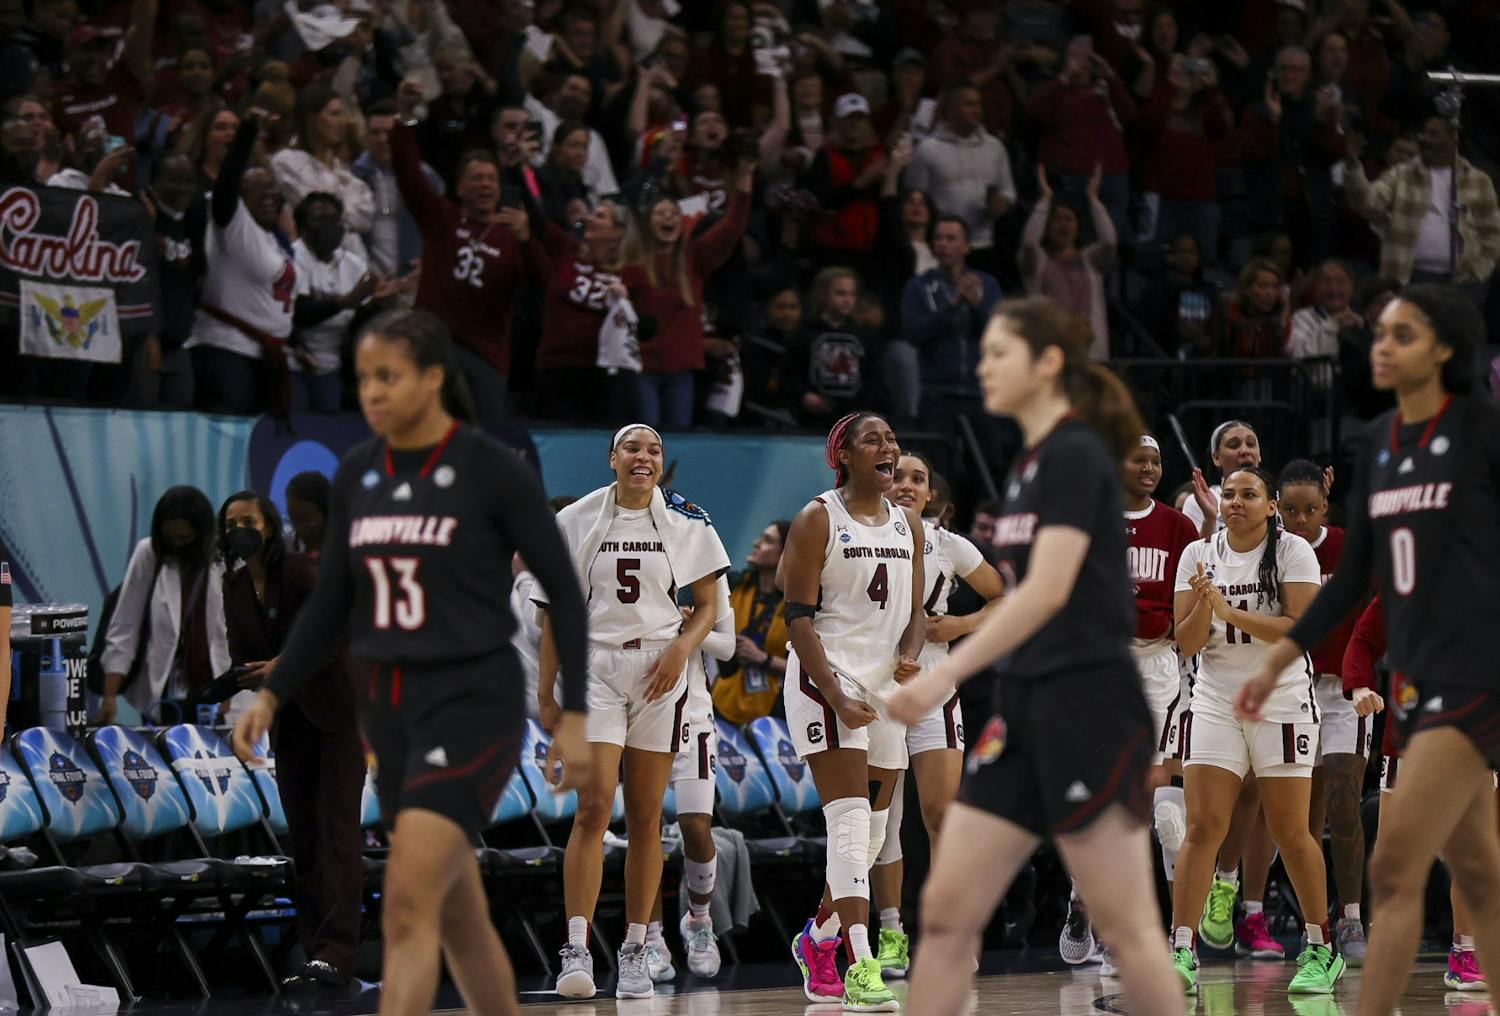 With a 72-59 victory over No. 1 Louisville on Friday April, 1, South Carolina has officially advanced to the NCAA National Championship game on Sunday, April 3.&nbsp;